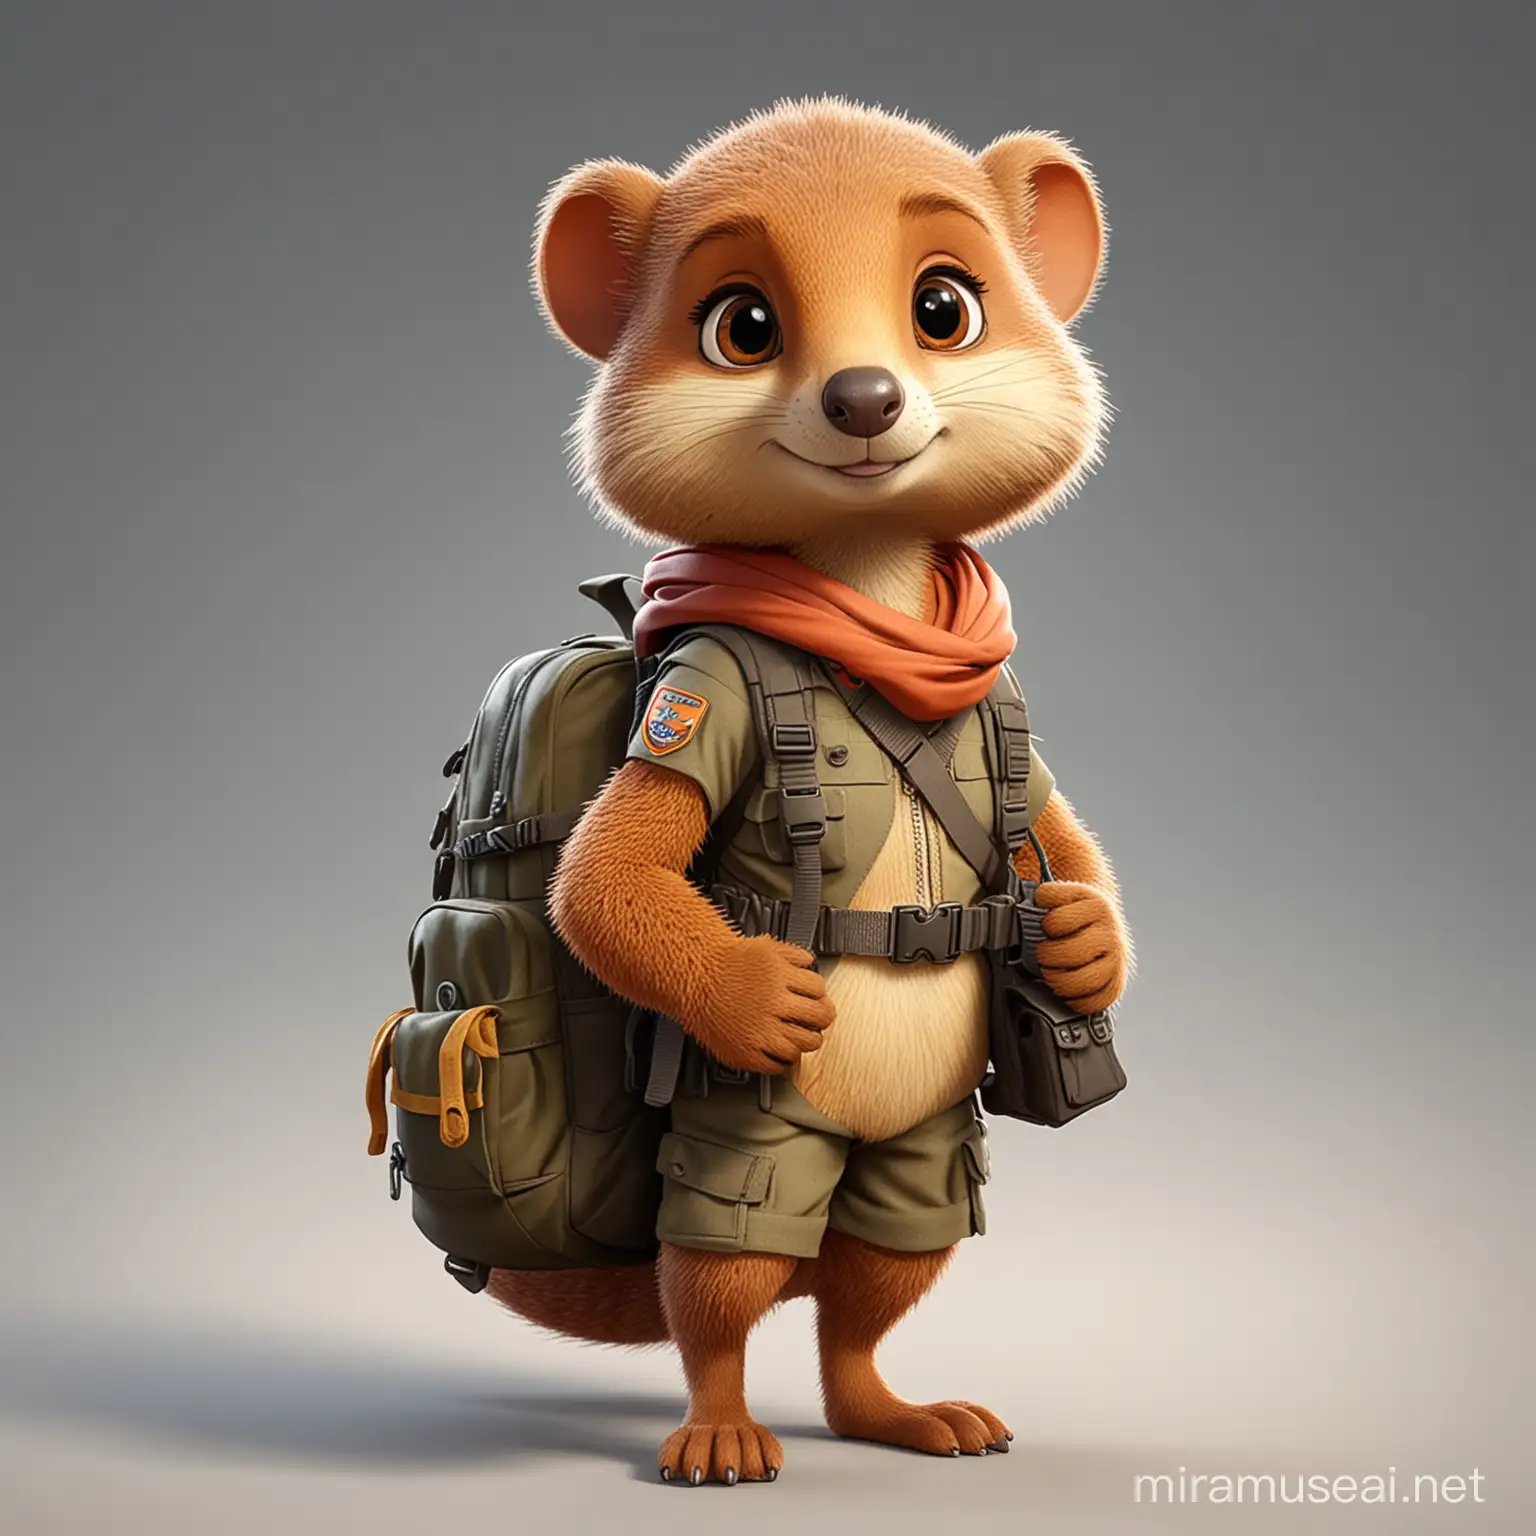 Adorable Cartoon Mongoose with Adventure Backpack